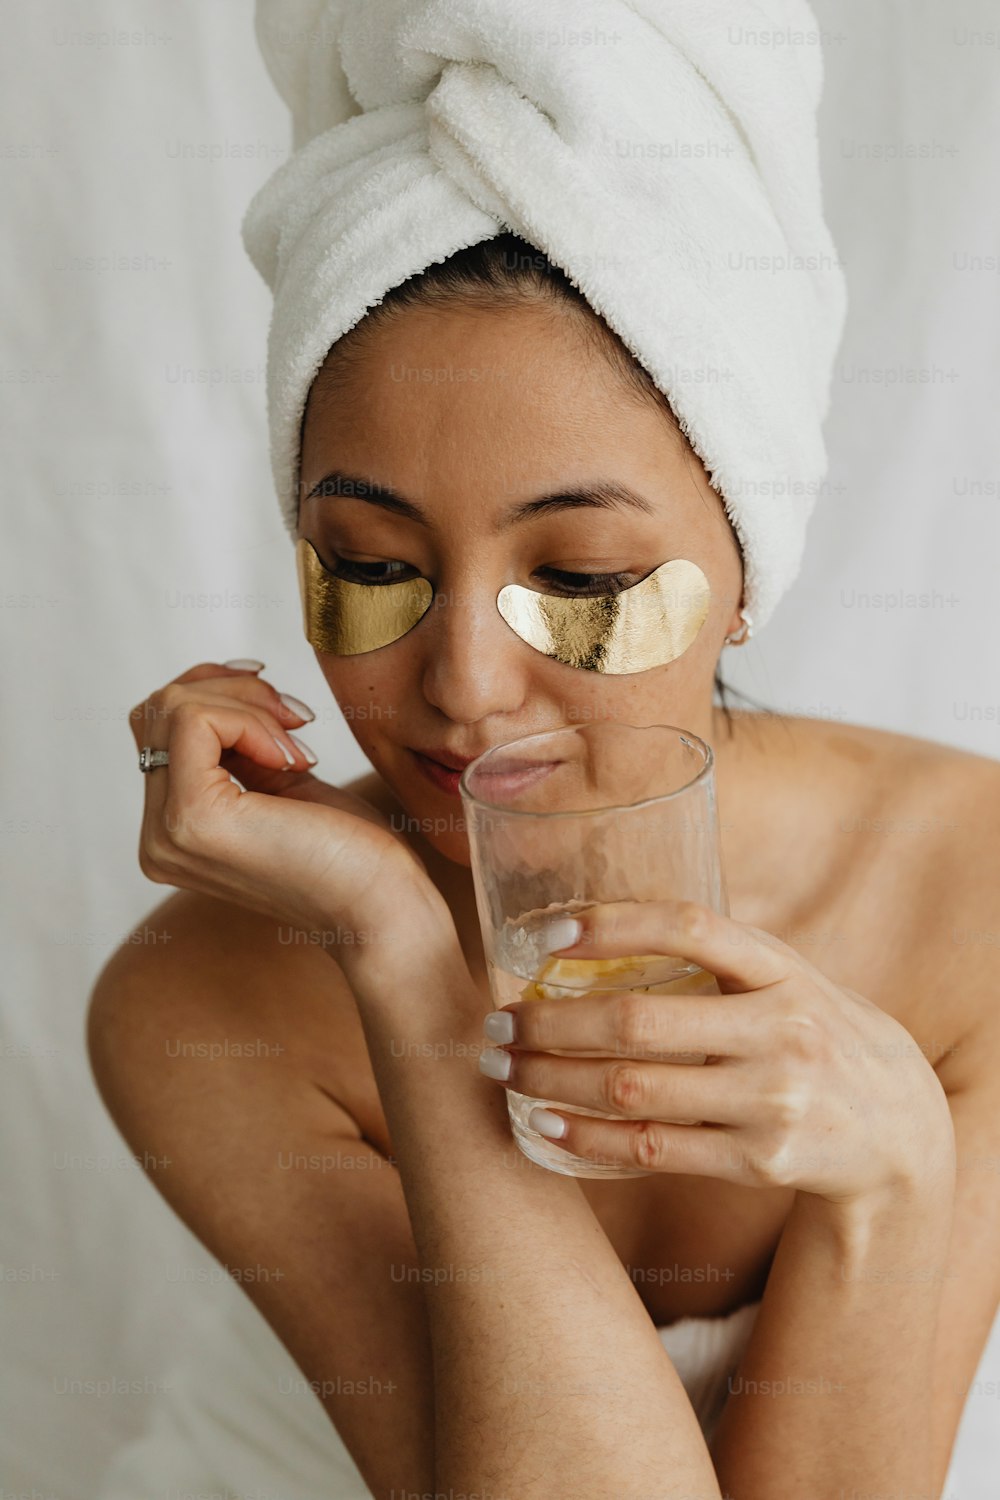 a woman with a towel on her head holding a glass of water